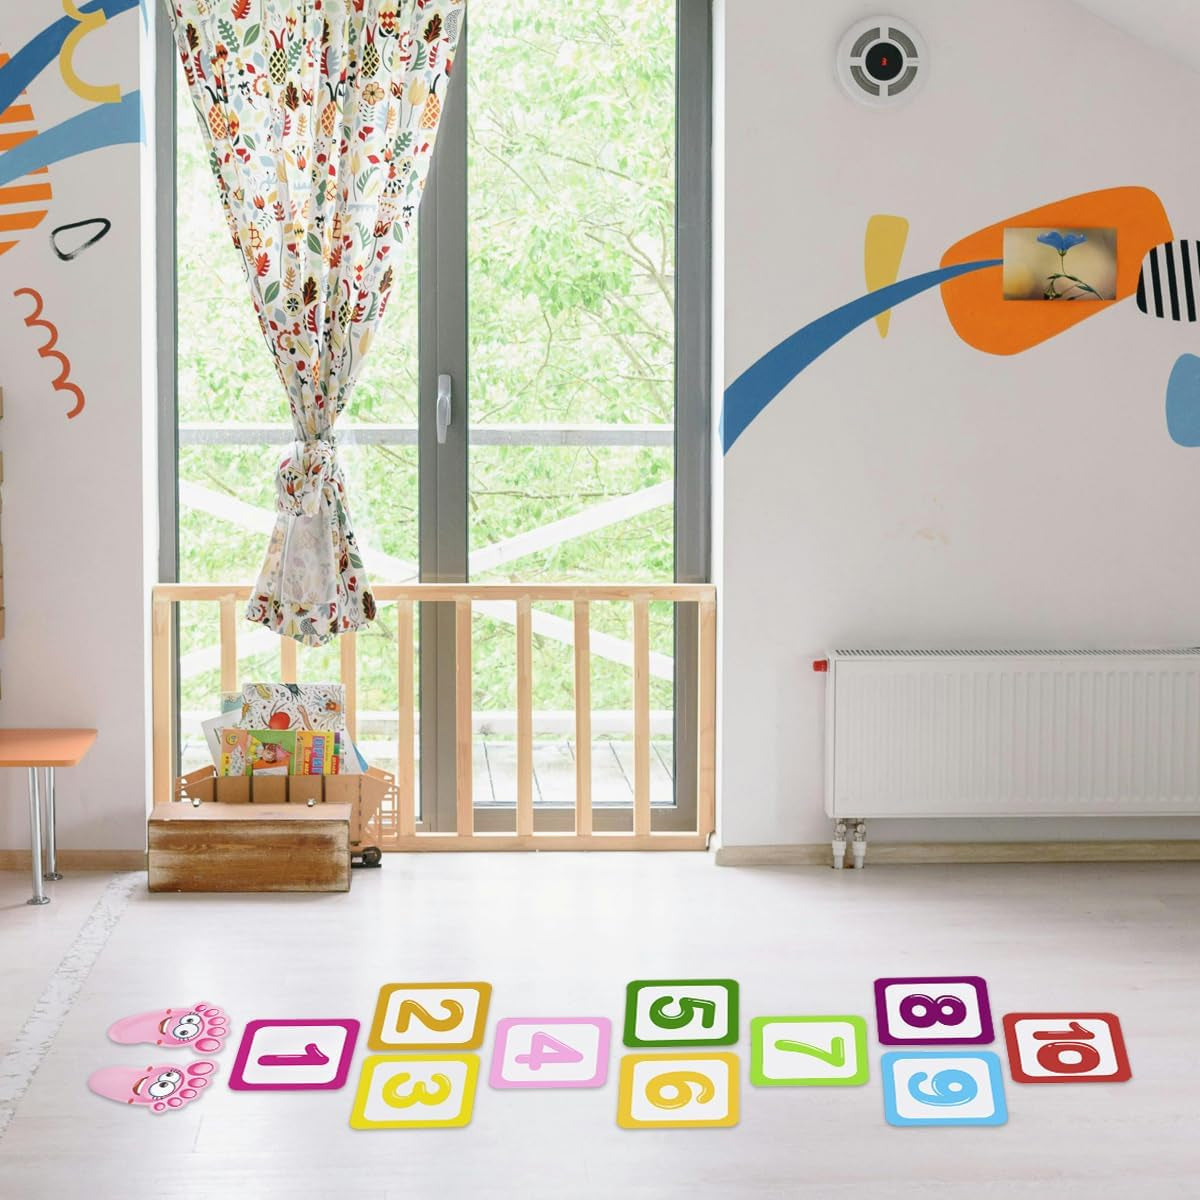 10 PCS Number Lattice Floor Sticker with 1 Pair Kids Footprint Stickers, Funny Number Hopscotch Game Floor Stickers Wall Decals for Classroom Bedroom Living Room Ground Corridor Nursery